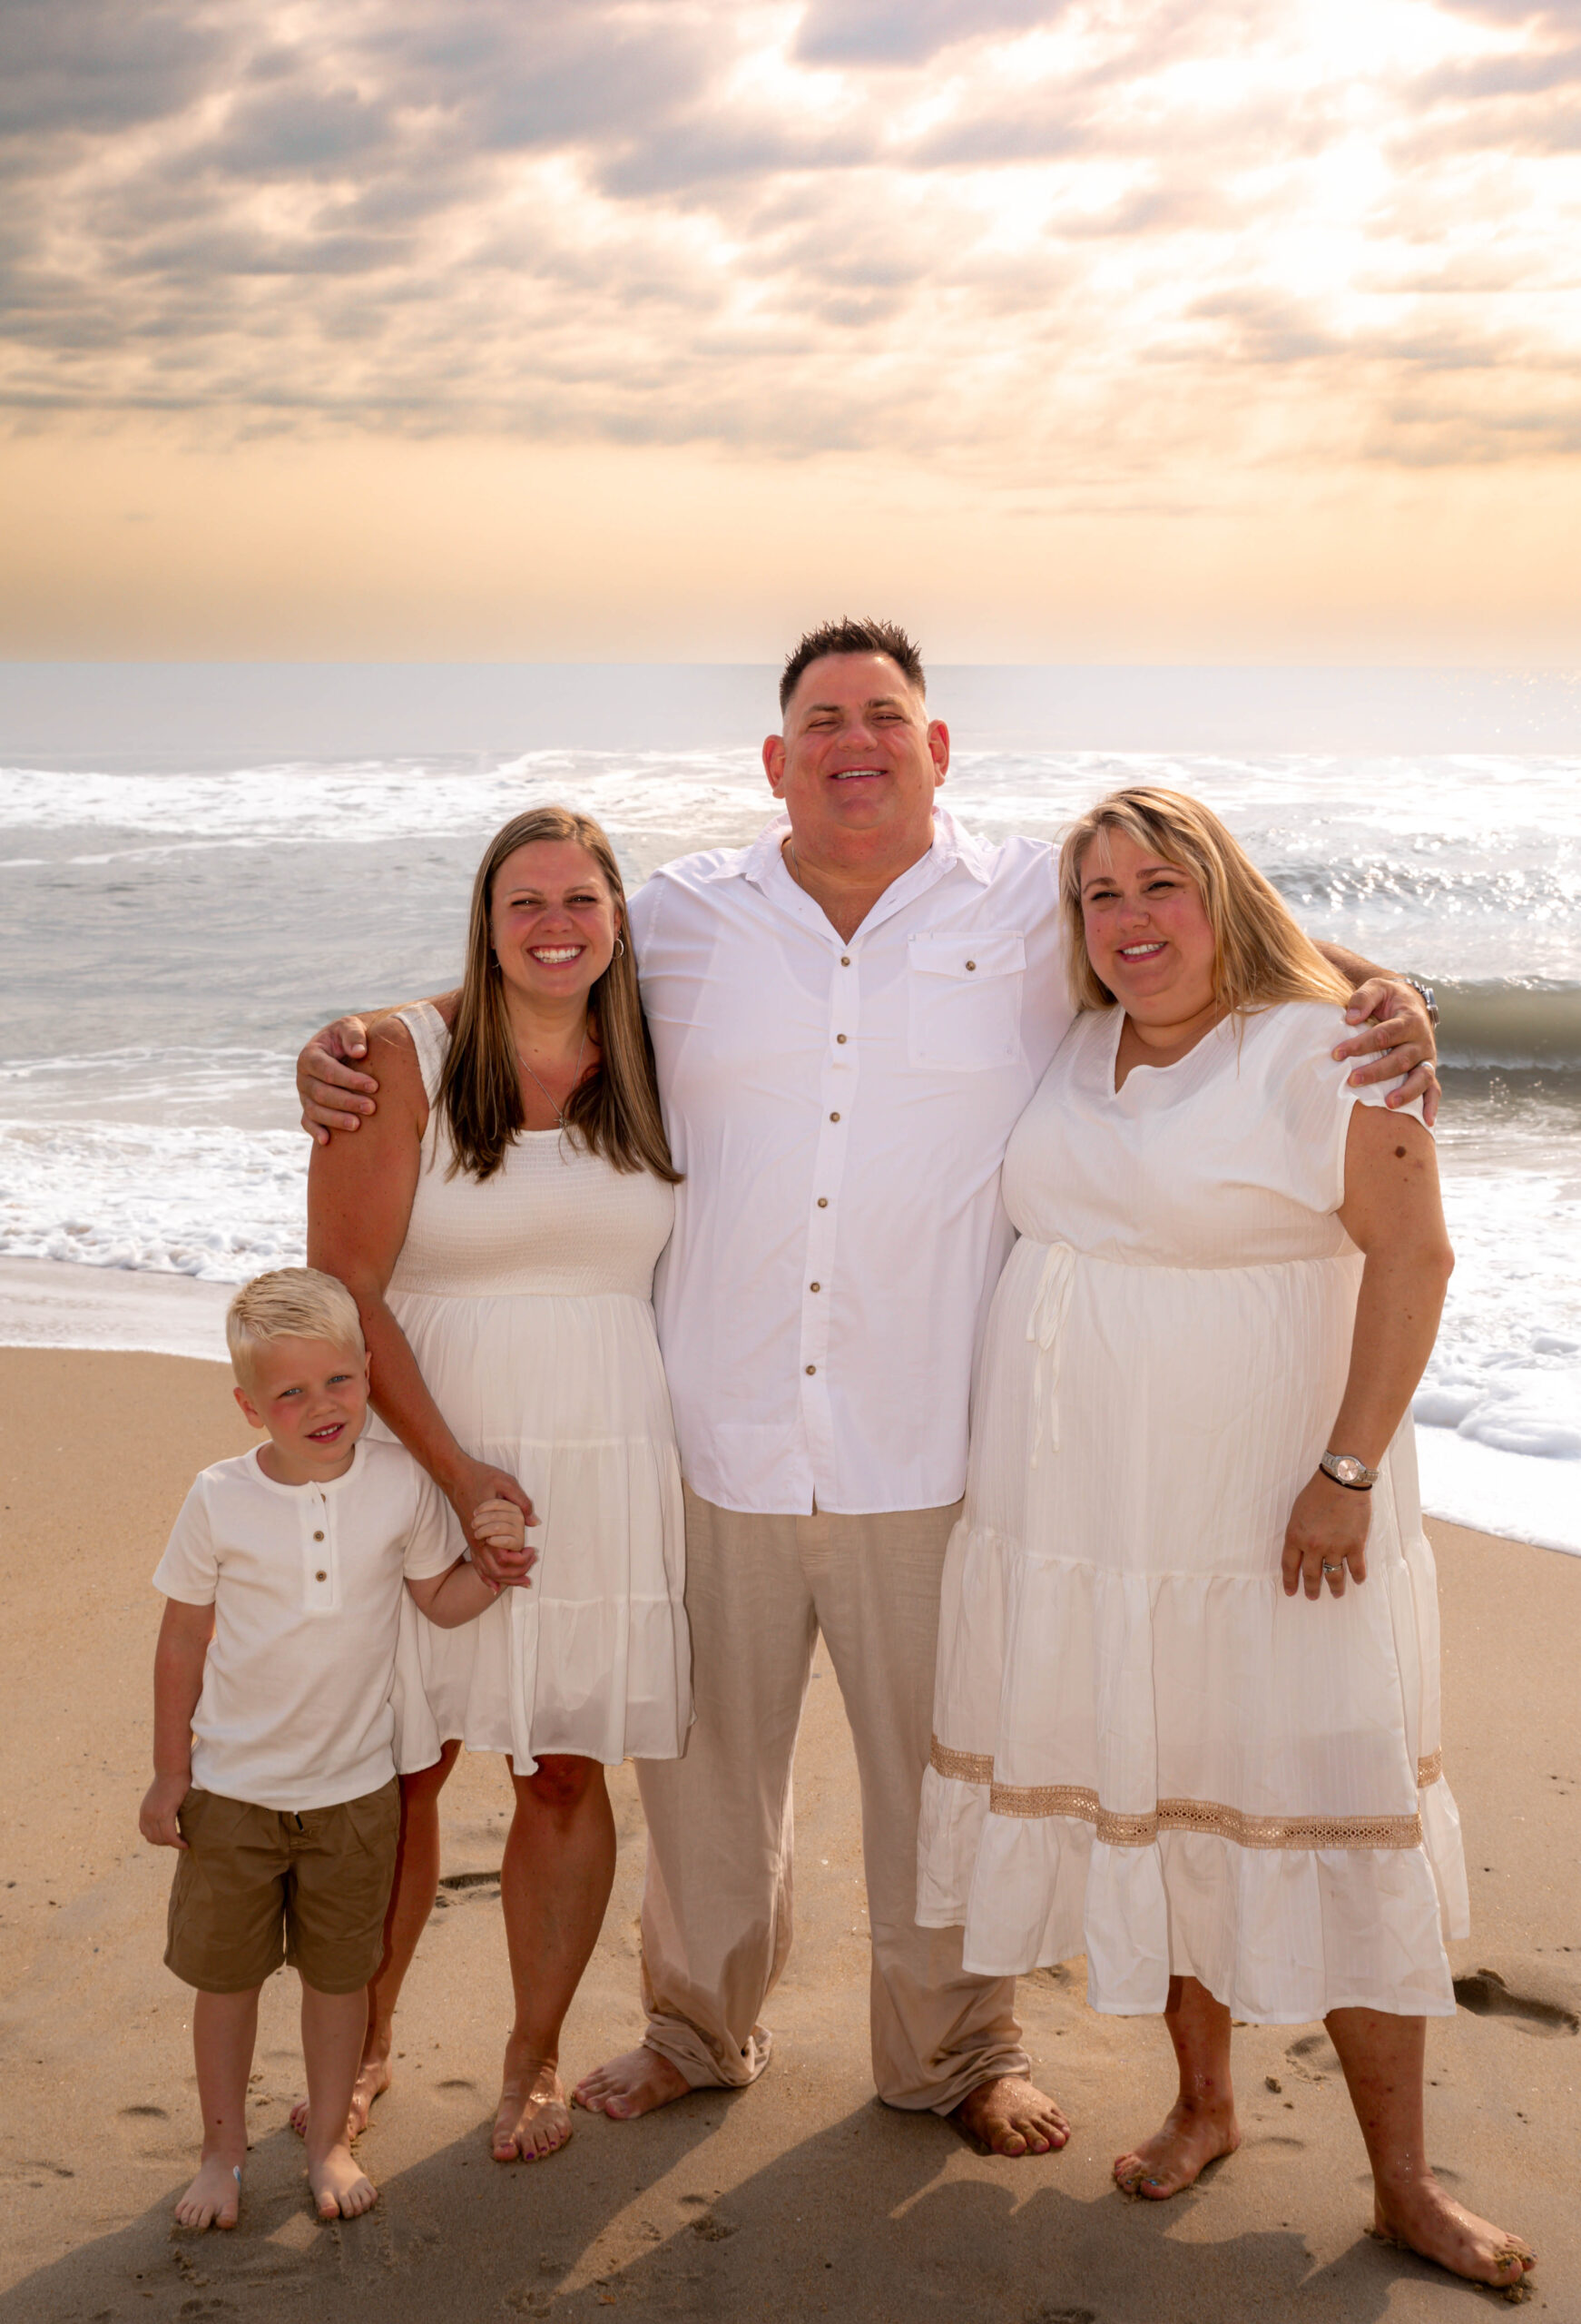 obx family beach photography and weddings mary ks photography obxfamily session obx outer banks